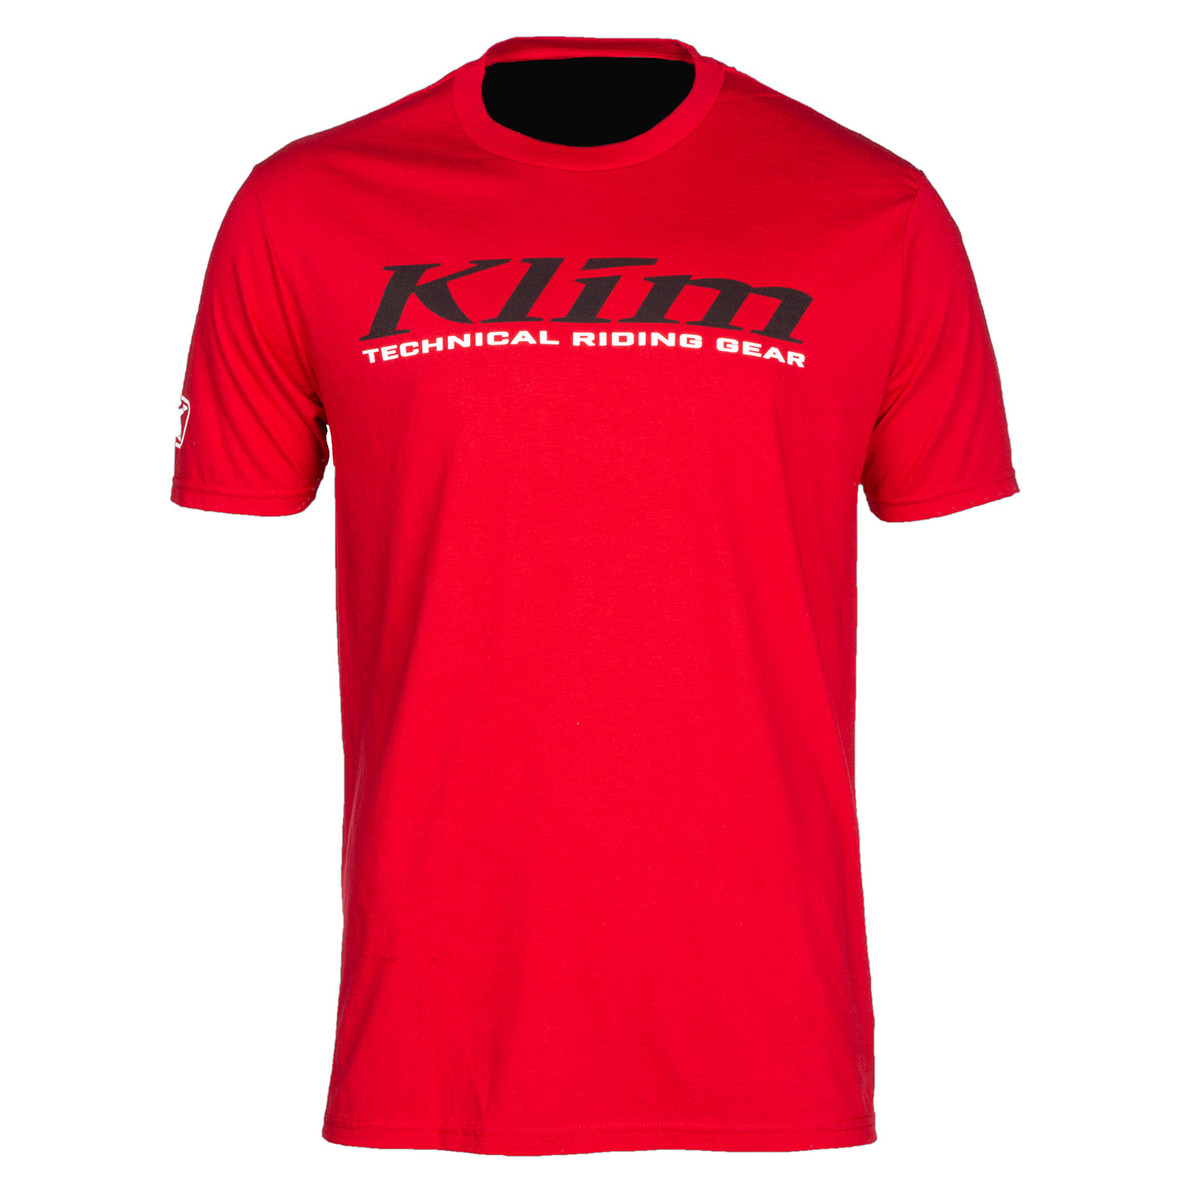 K Corp SS T Red - Black